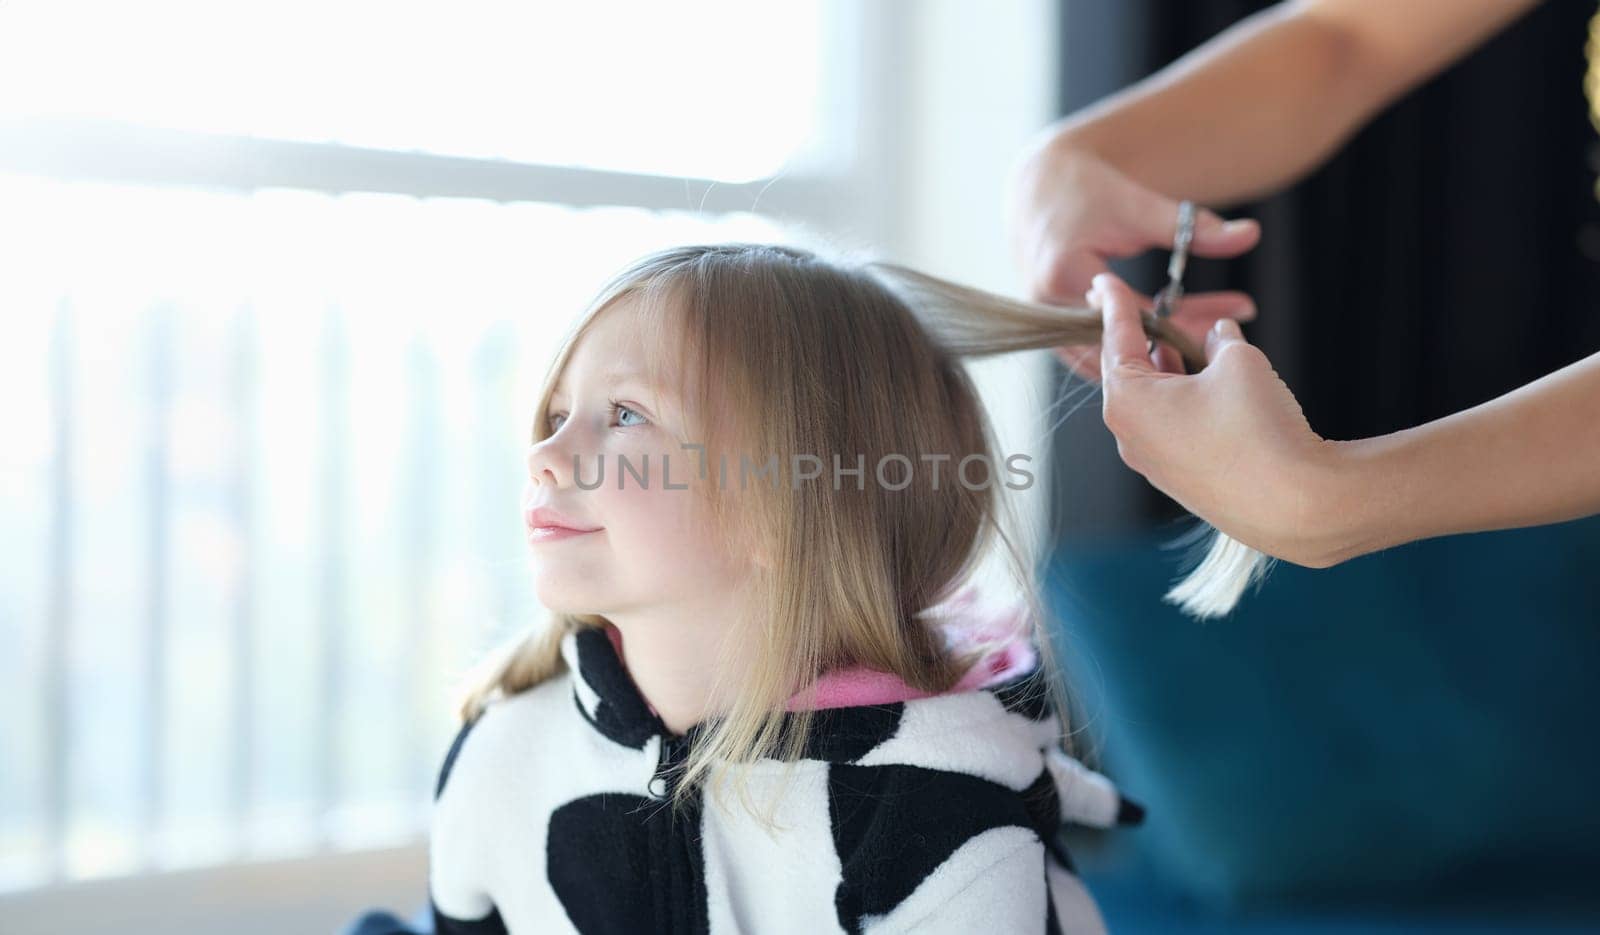 Hairdresser cutting hair of little girl in beauty salon. Hairdressing services for children concept